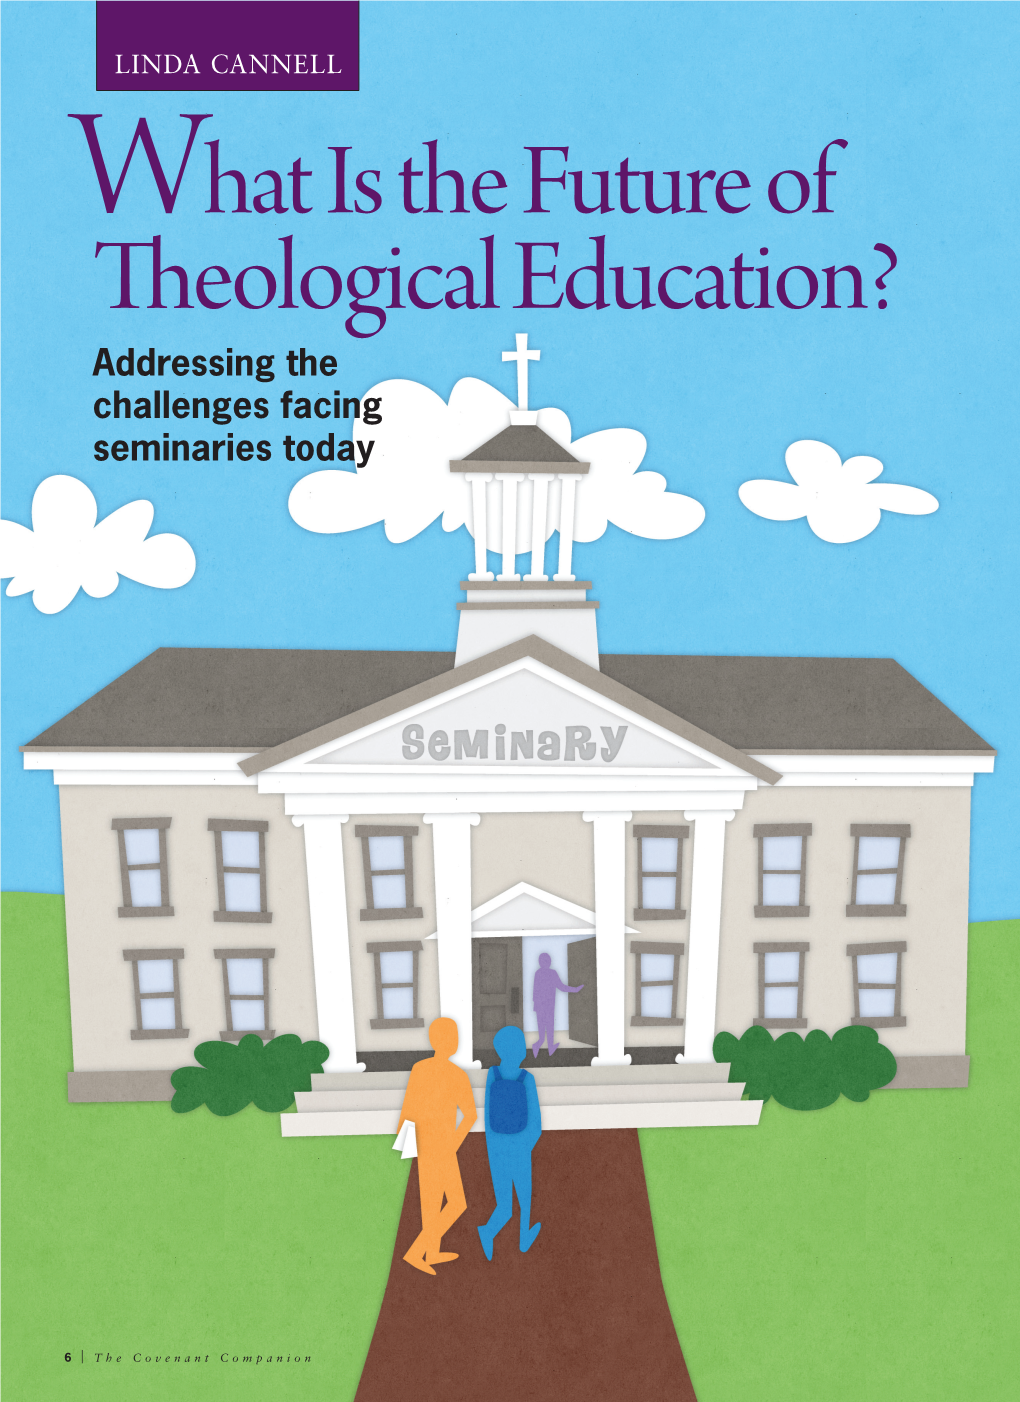 What Is the Future of Theological Education? Addressing the Challenges Facing Seminaries Today